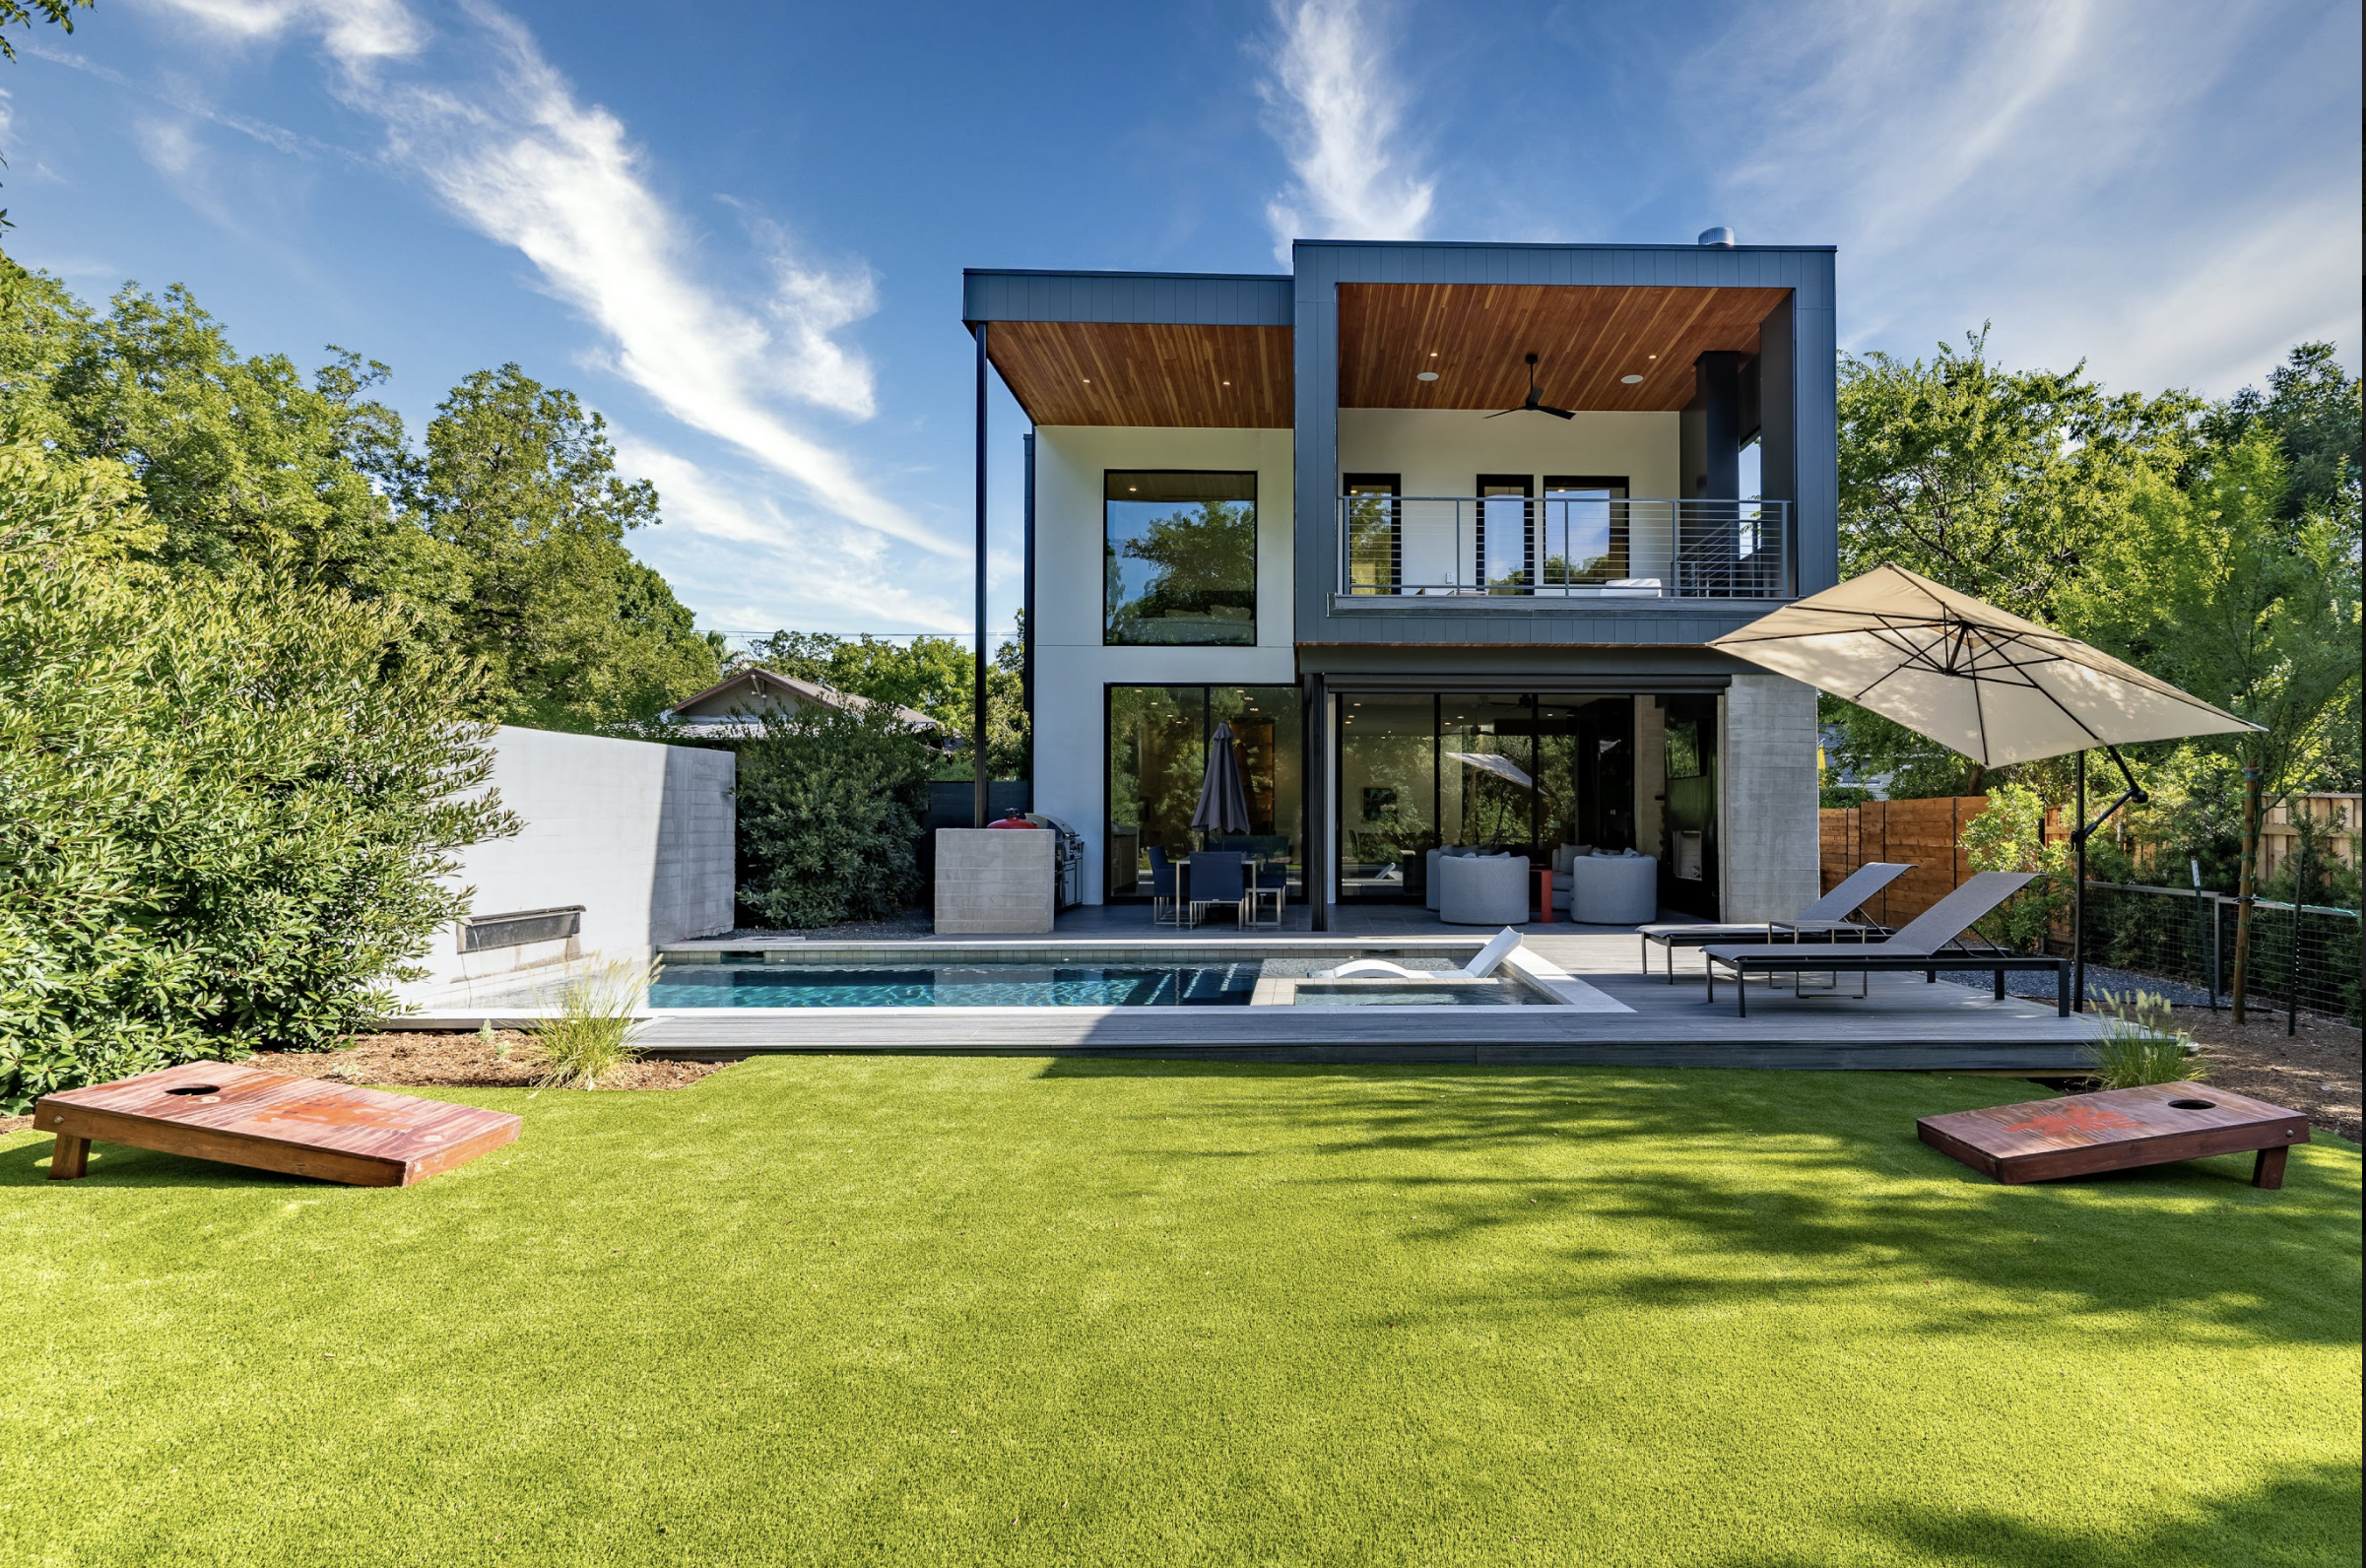 view from the rear of a back yard toward a modern home with second-floor balcony overlooking a pool with a deck lounge chairs, and cantilever umbrella for shade